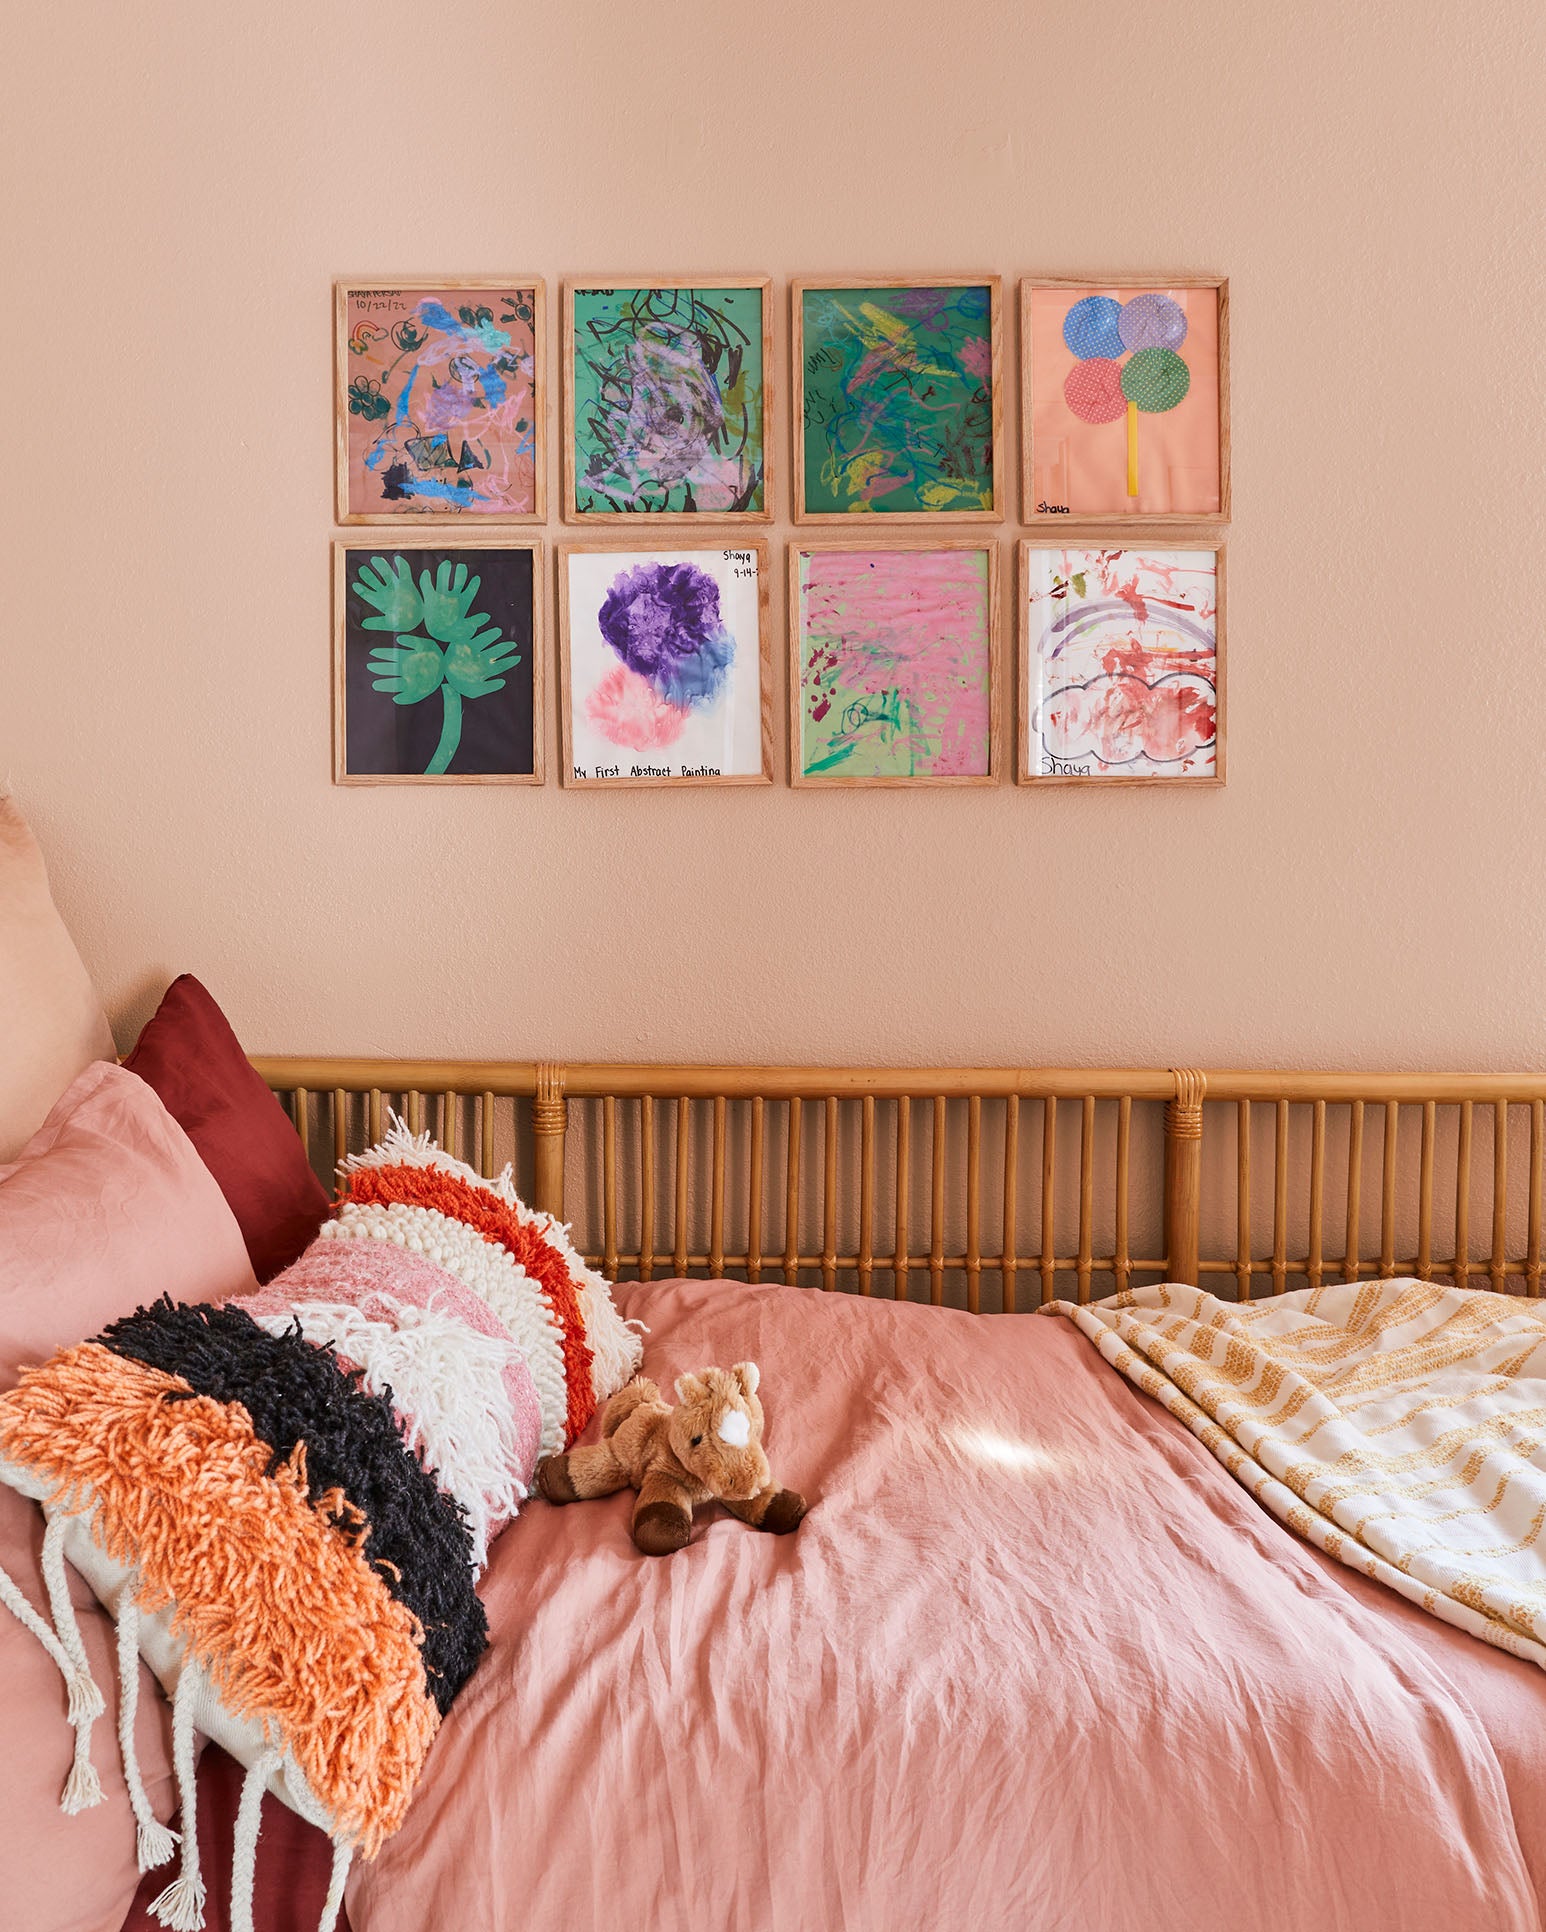 Personal touches make decorating a little girl's room feel special and welcoming.